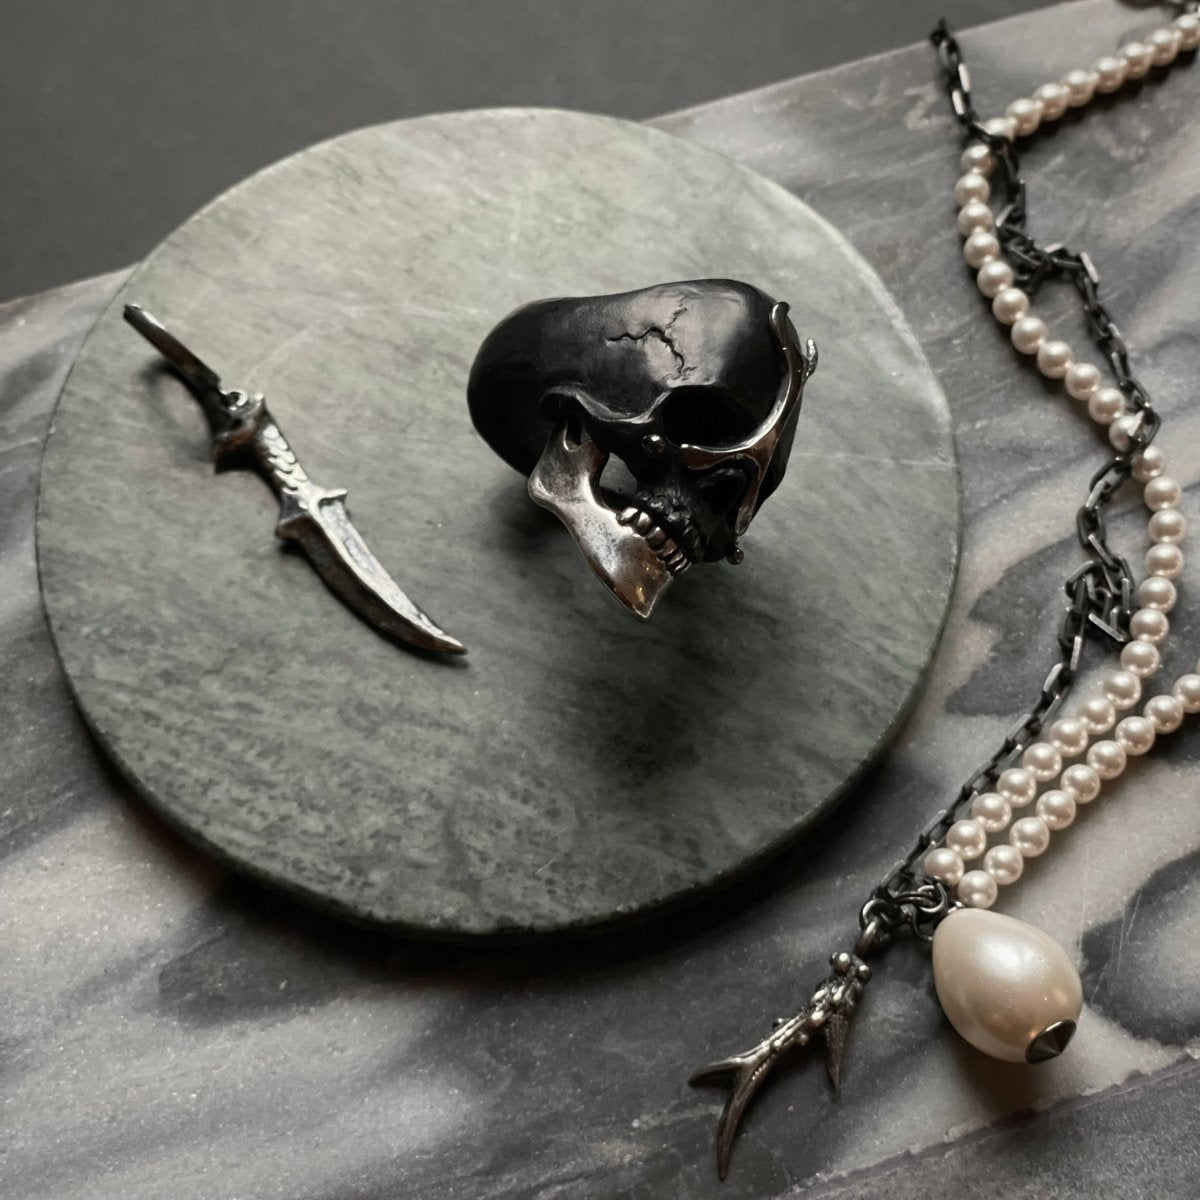 GRIFFIN SABRE EARRING - Macabre Gadgets Store